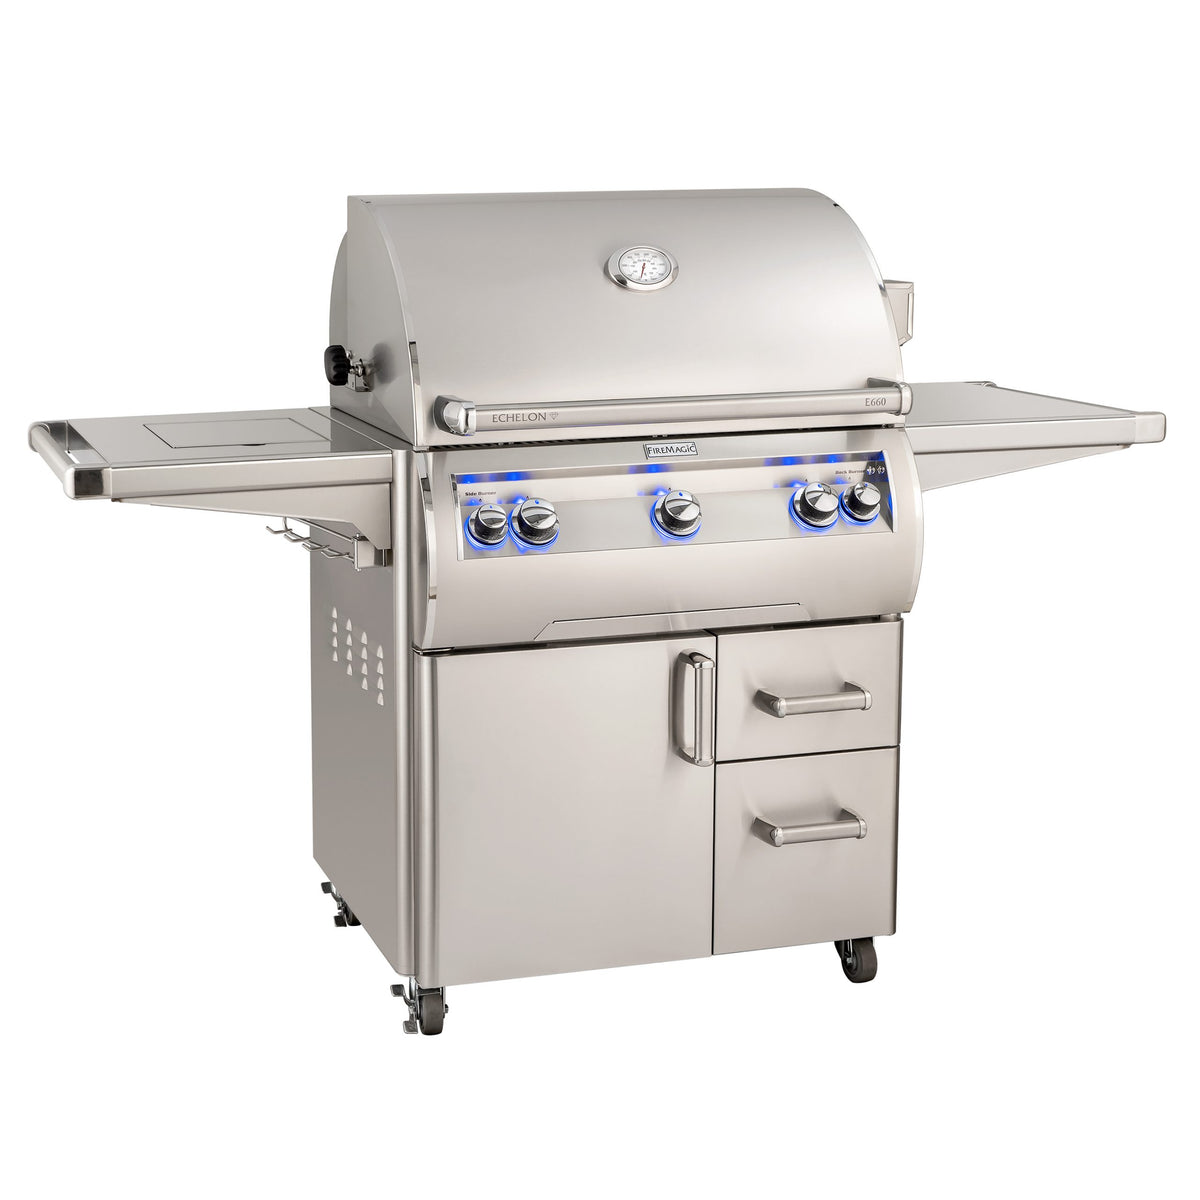 Fire Magic Echelon E660s Portable Grills with Analog Thermometer &amp; Single Side Burner